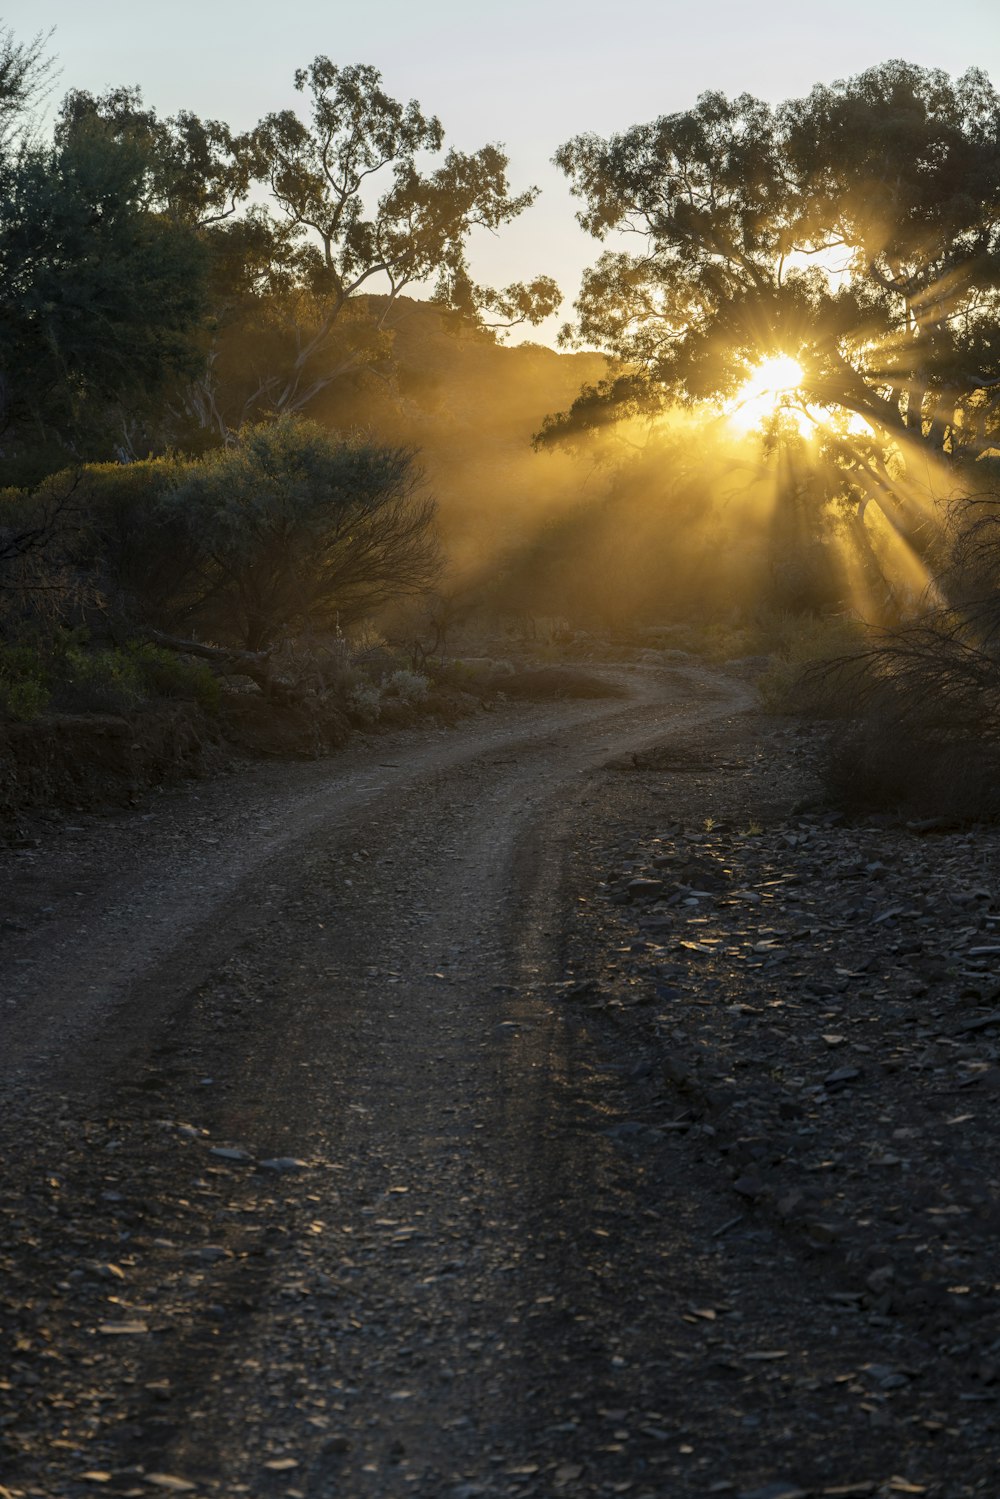 the sun is shining through the trees on a dirt road